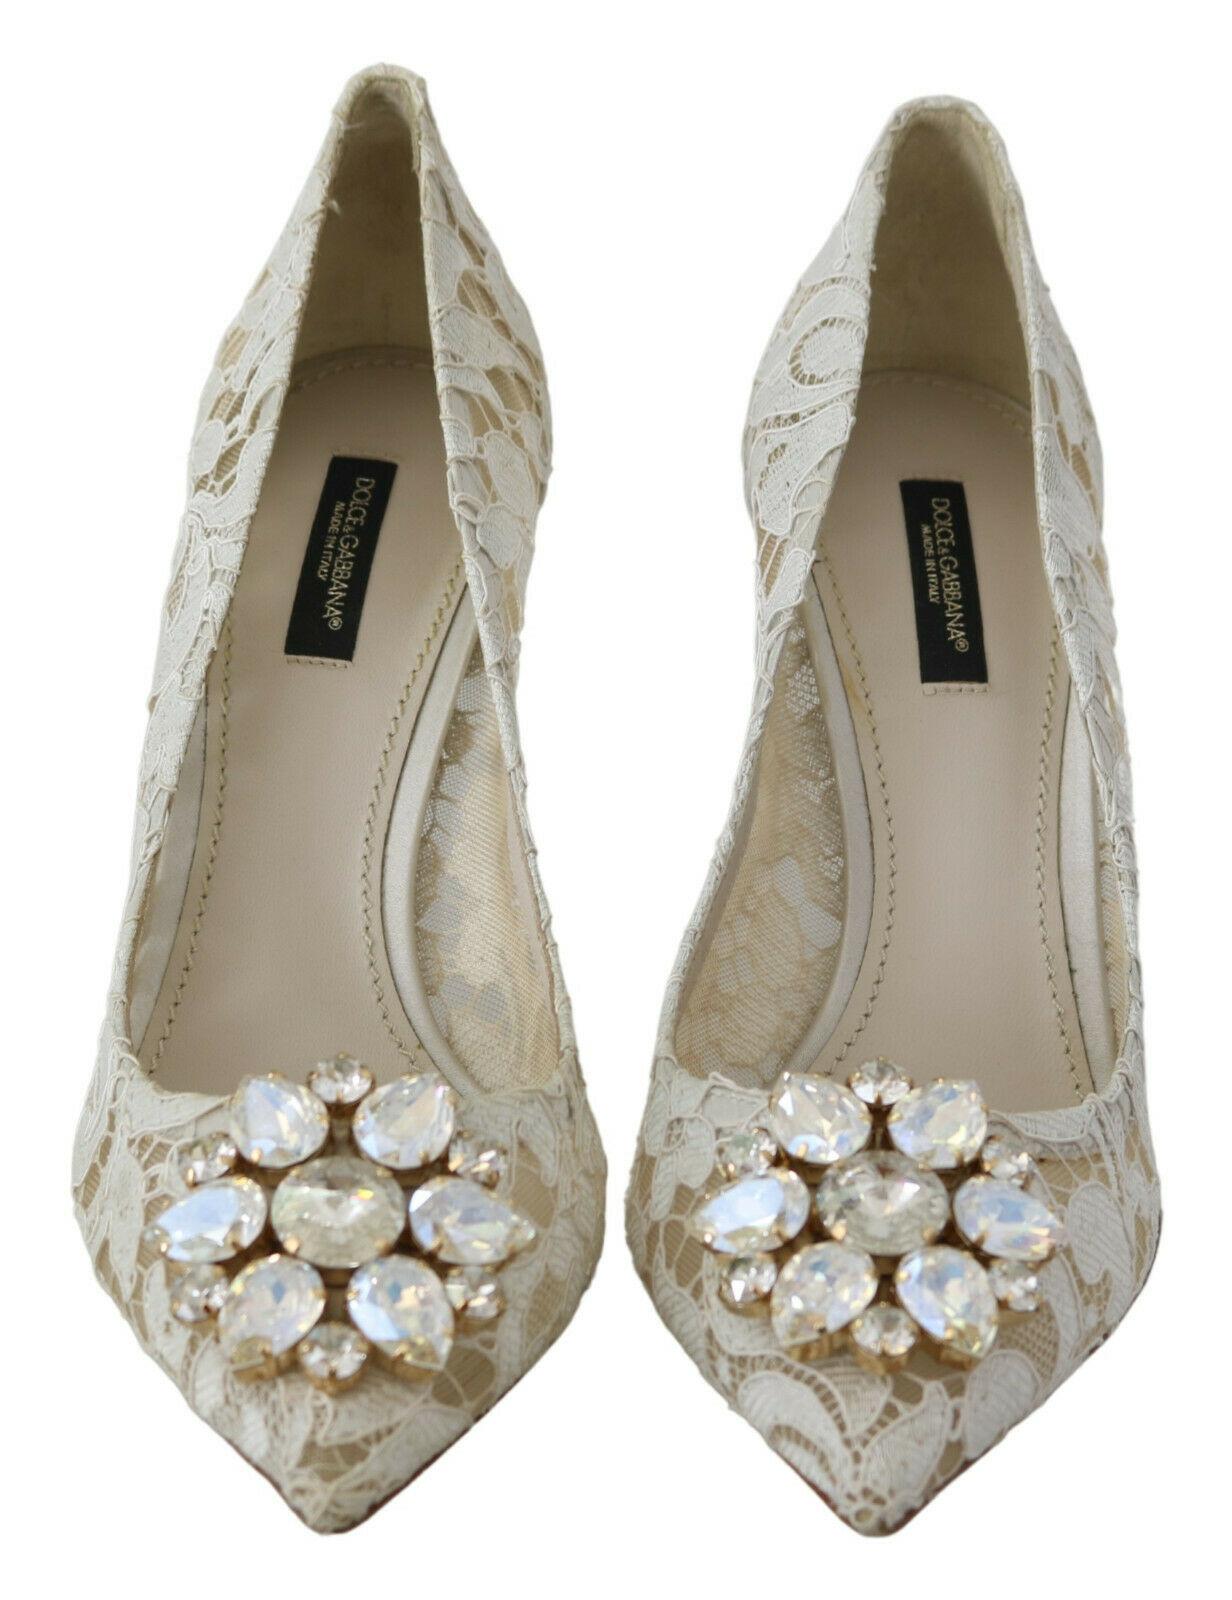 Dolce & Gabbana White Floral Lace Pointy Pumps Shoes Heels With Jewels Crystals 1